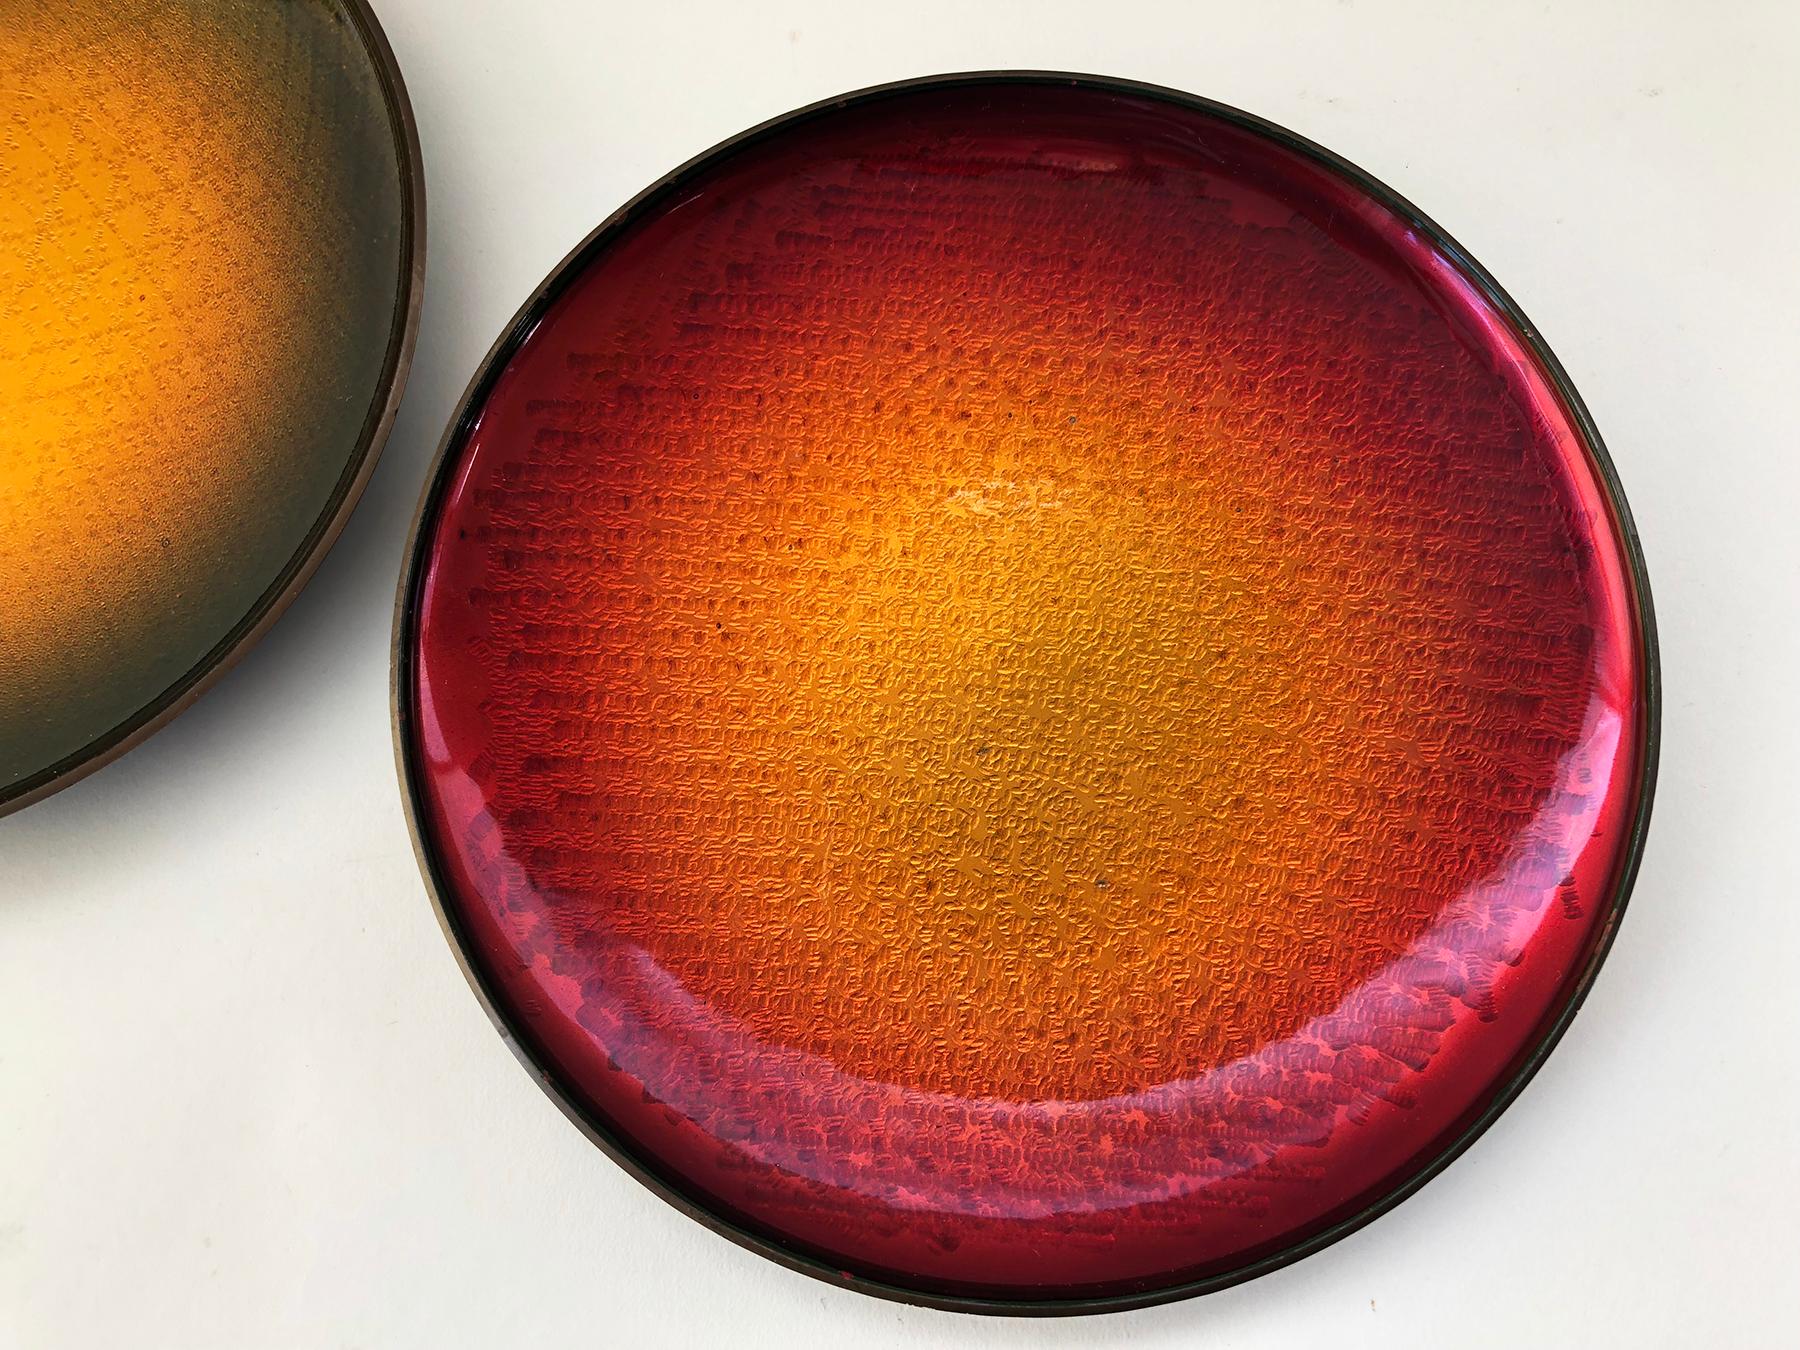 Pair of Norwegian enamel over copper trays or plates by David Andersen, circa 1960s. Plates have good weight and also have a hanging device on the bottom. Measuring 8.25